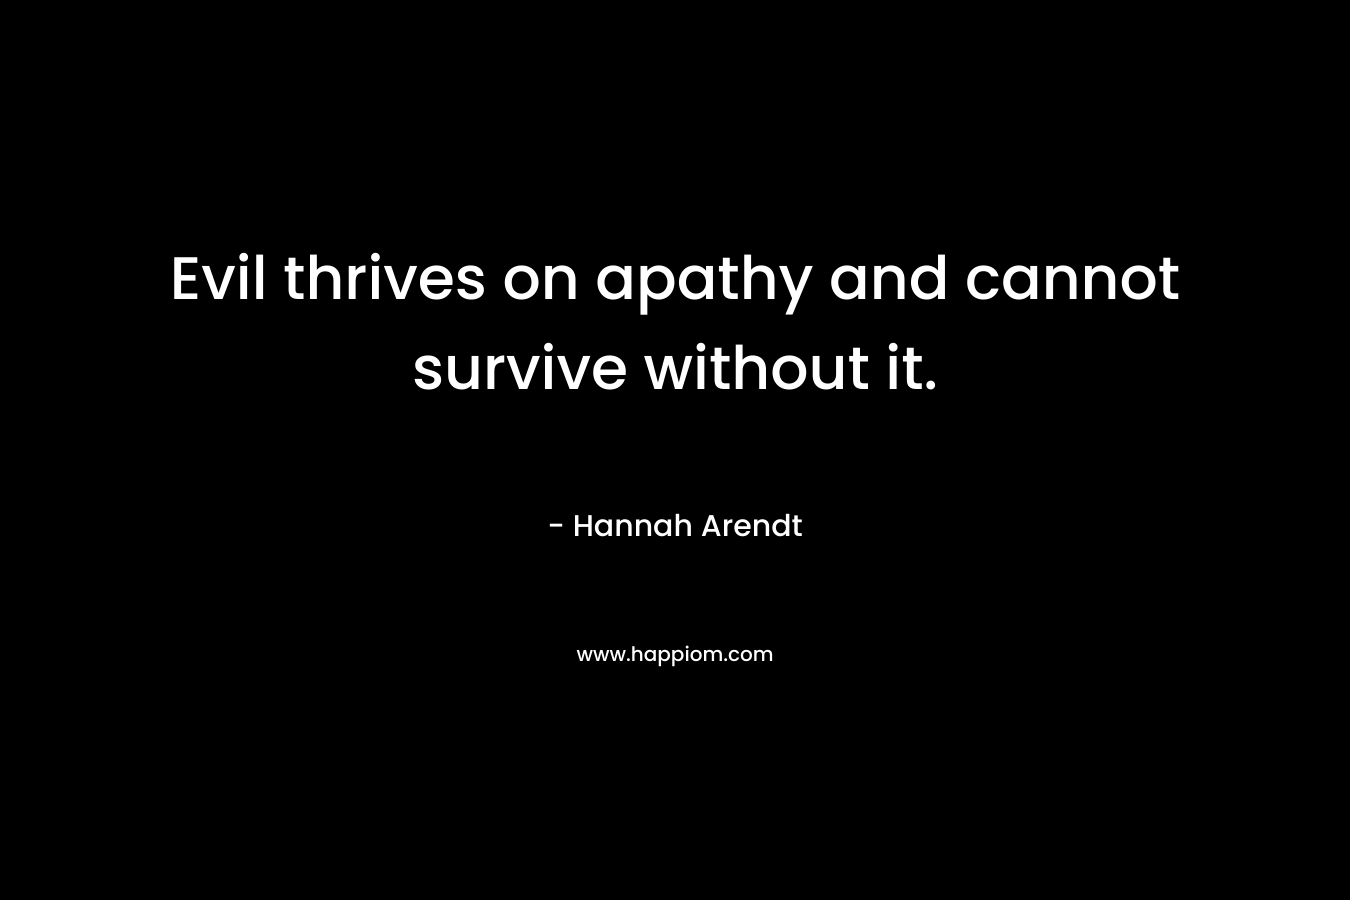 Evil thrives on apathy and cannot survive without it.